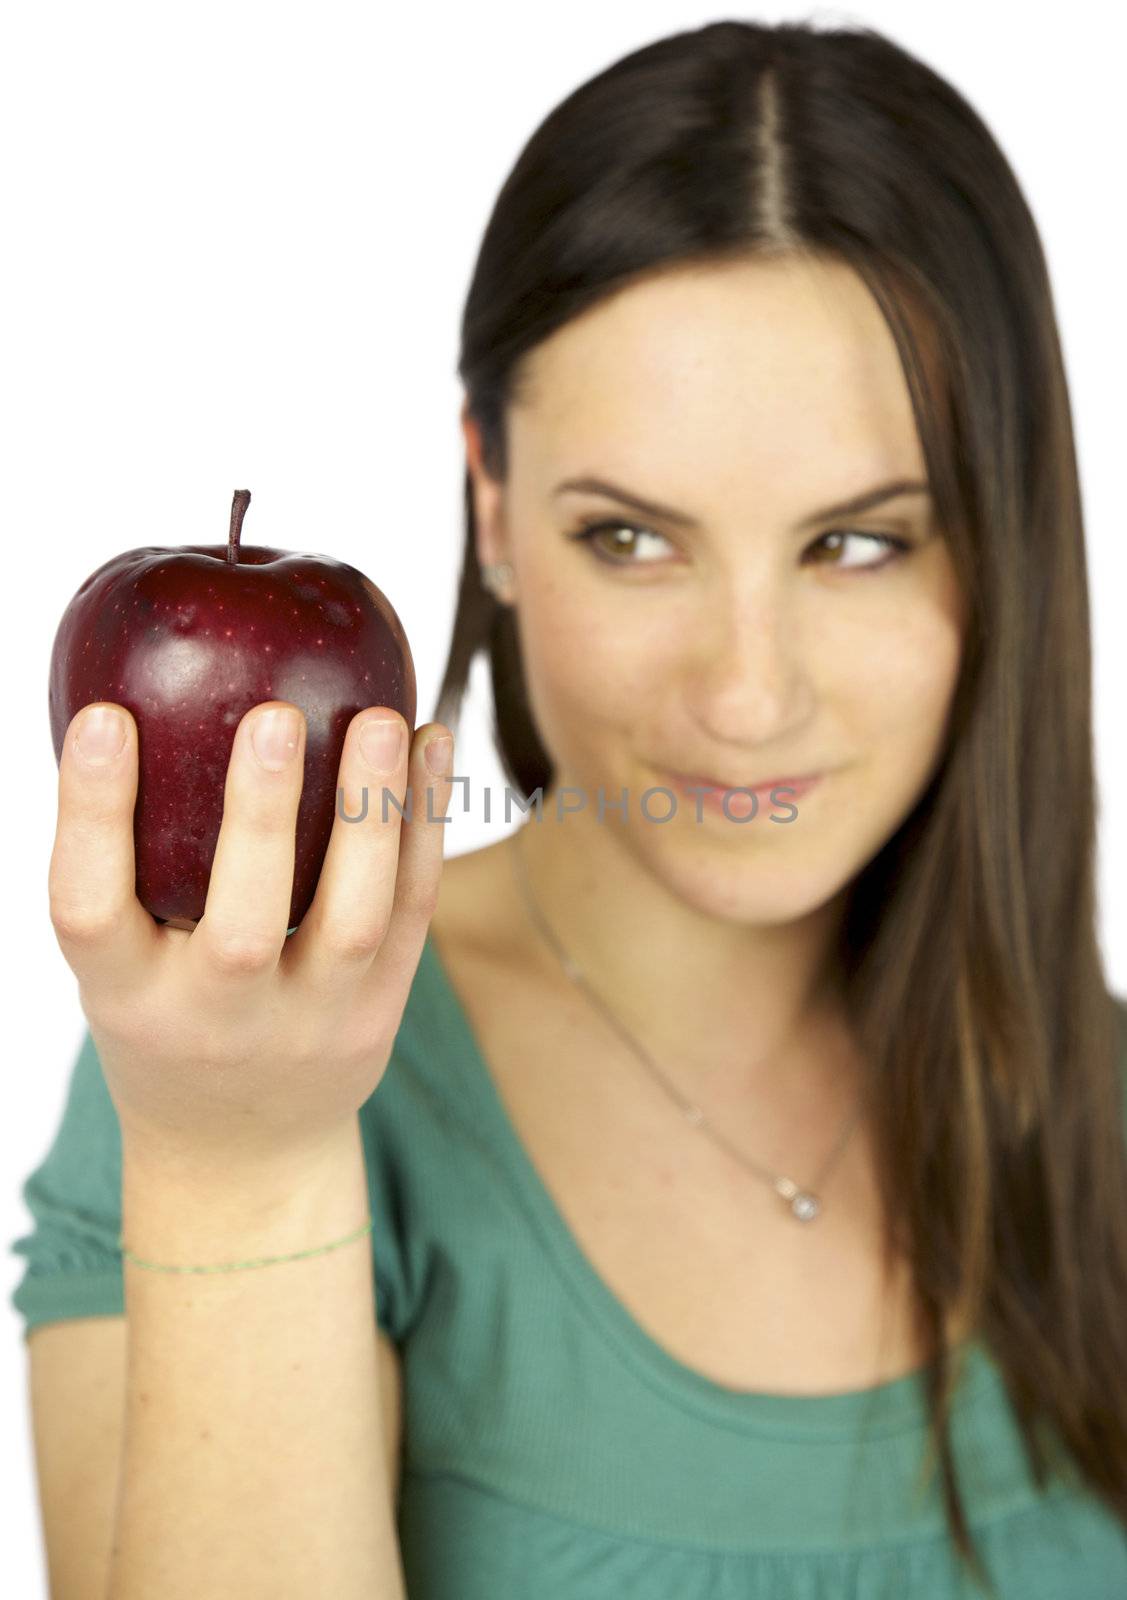 Girl out of focus watching apple in focus by fmarsicano